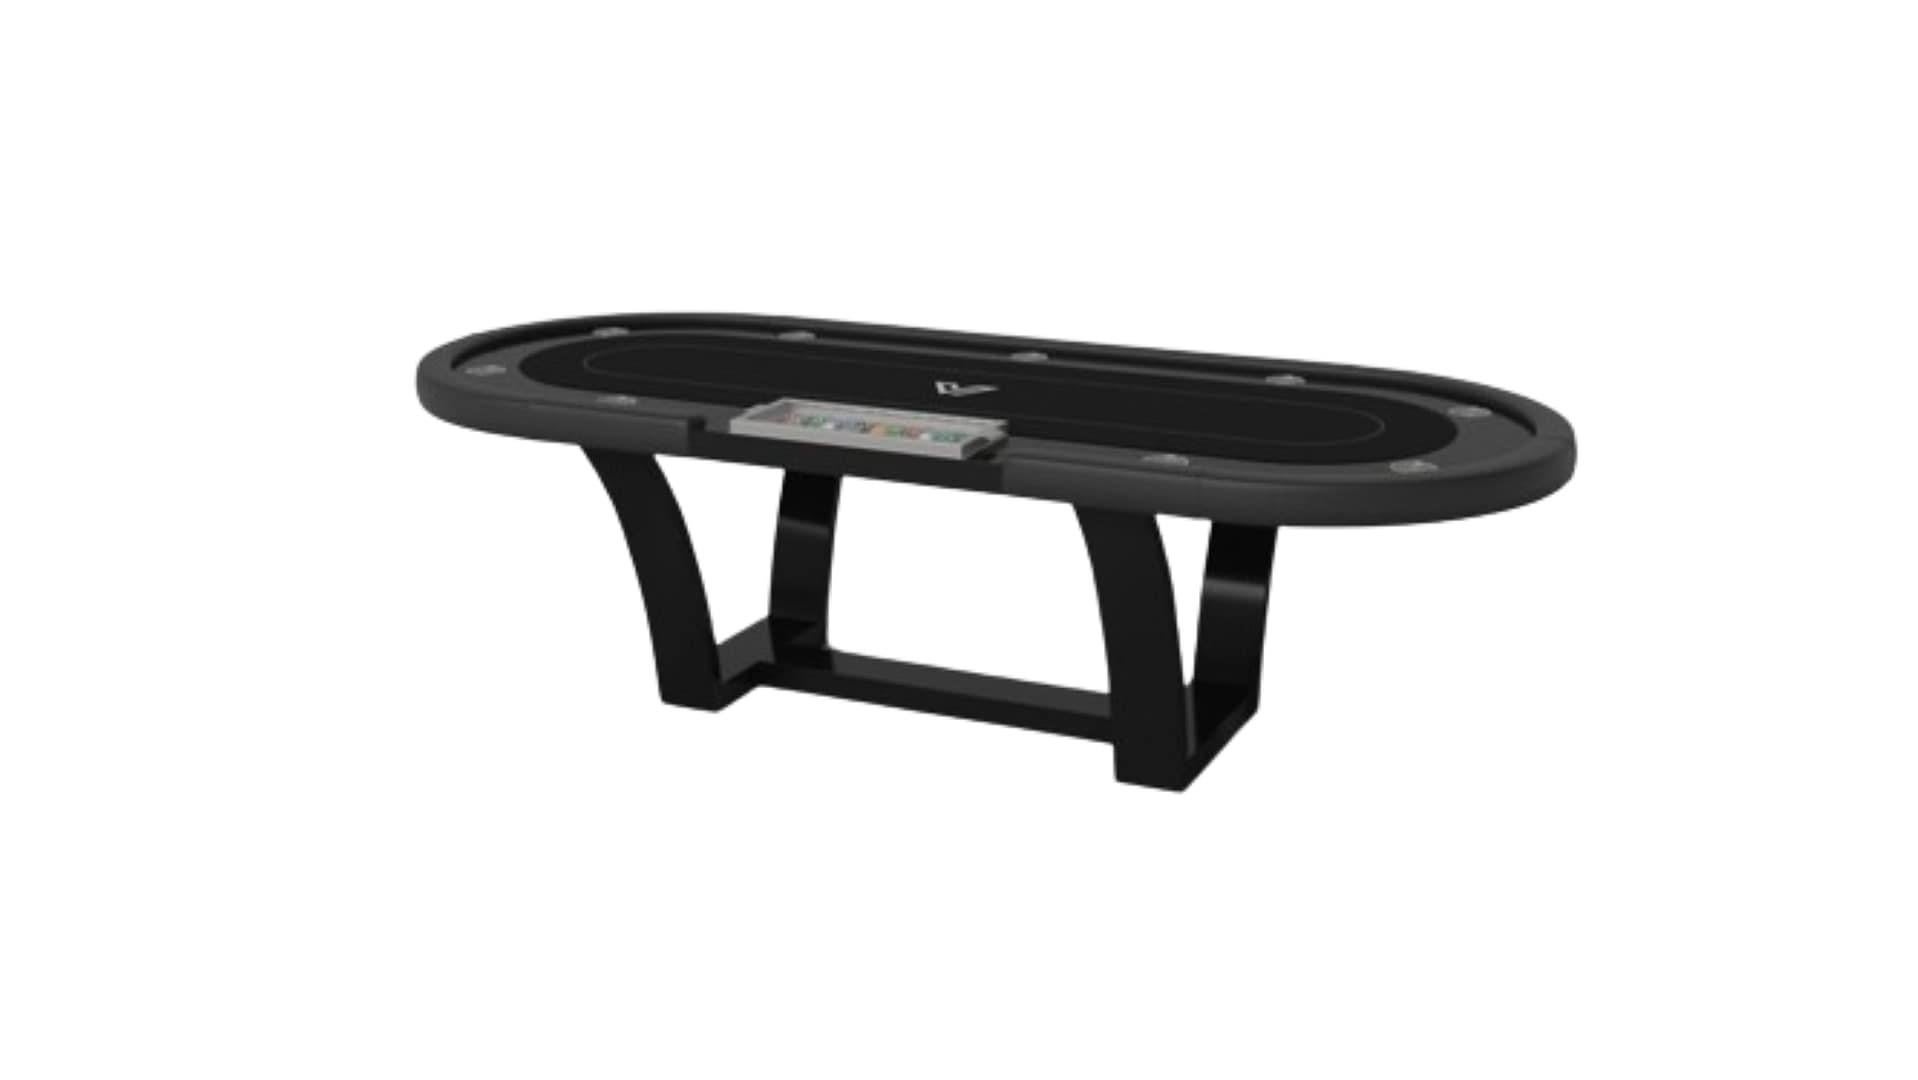 With an I-shaped metal base, slightly sloped metal legs, and a contrasting wood top, the Elite poker table exudes modern sophistication while evoking a sense of art deco design. This table is a confluence of style, made to meet today's demands and